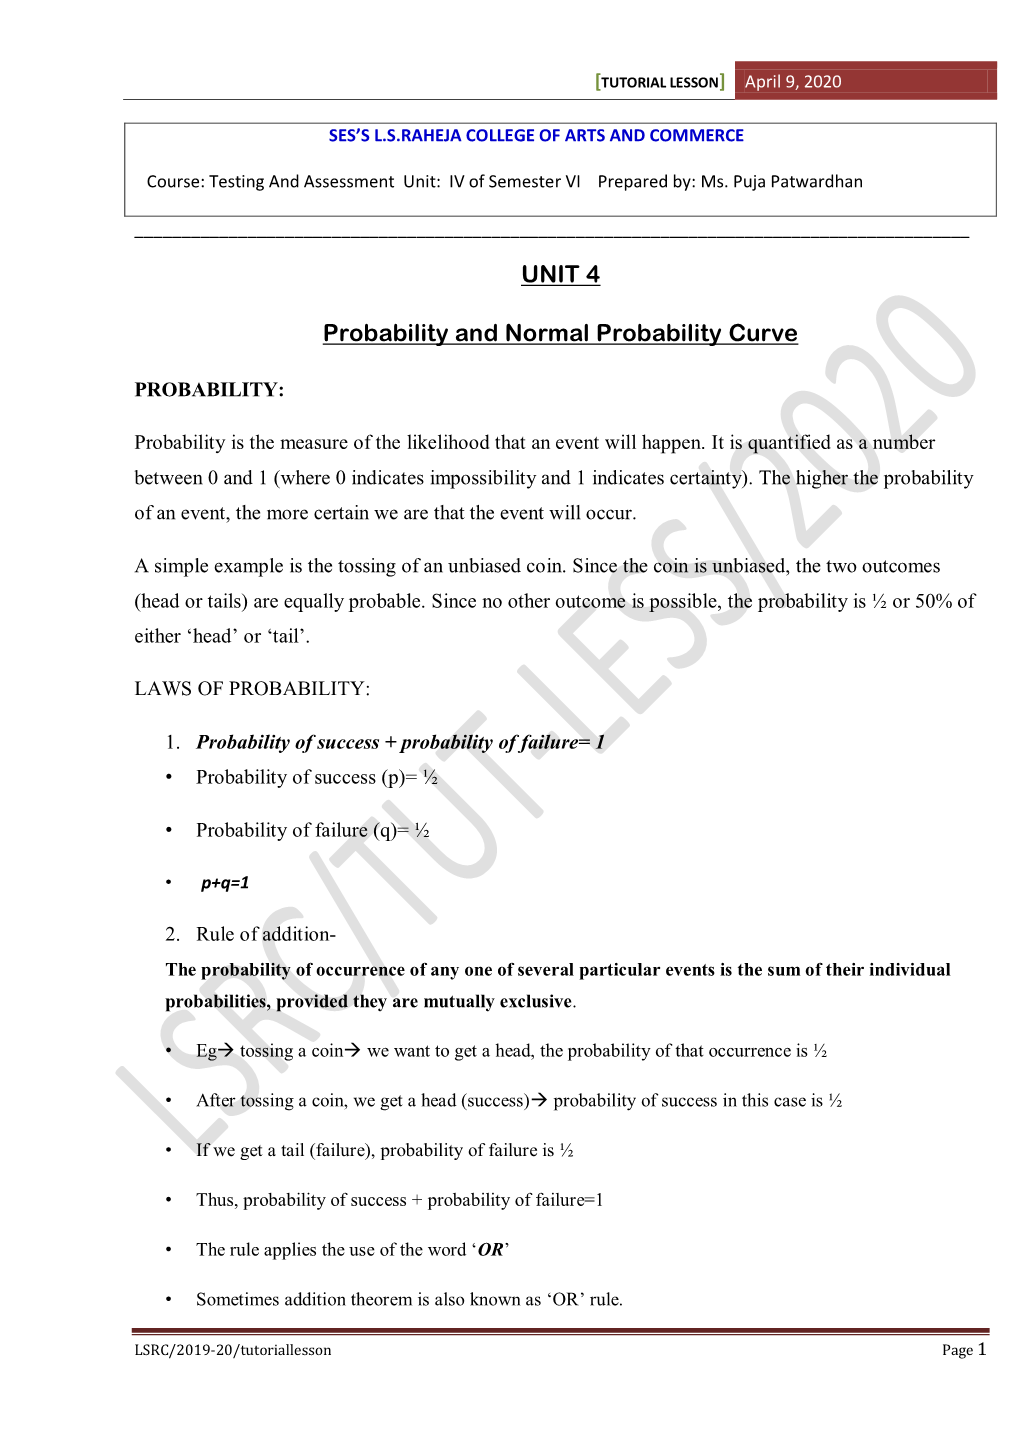 UNIT 4 Probability and Normal Probability Curve